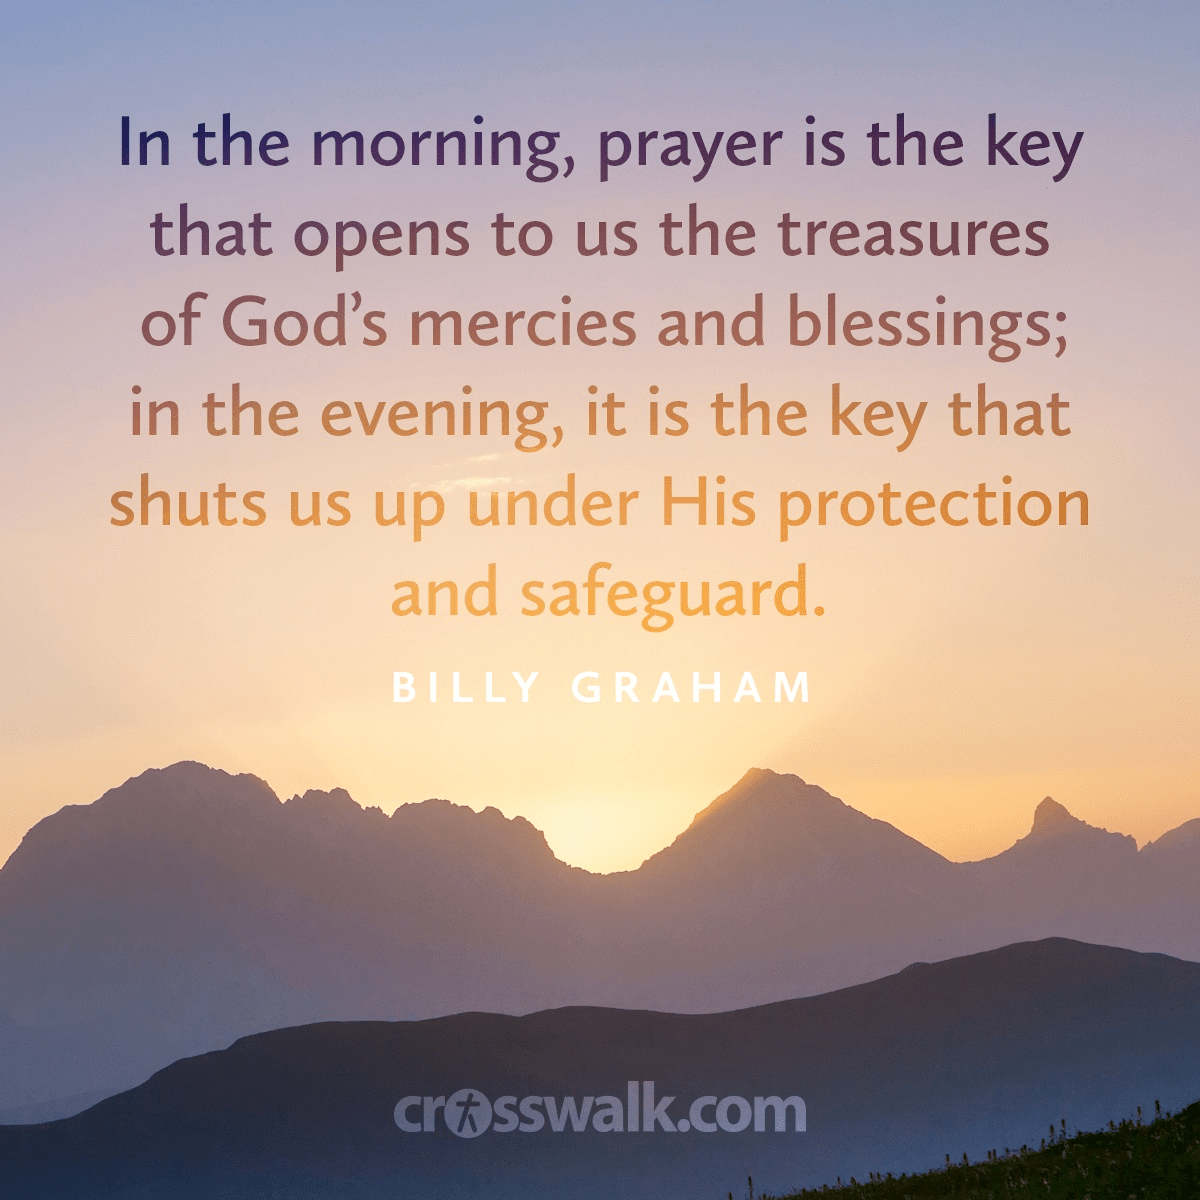 "In the morning, prayer is the key that opens to us the treasures of God's mercies and blessings; in the evening, it is the key that shuts us up under his protection and safeguard."